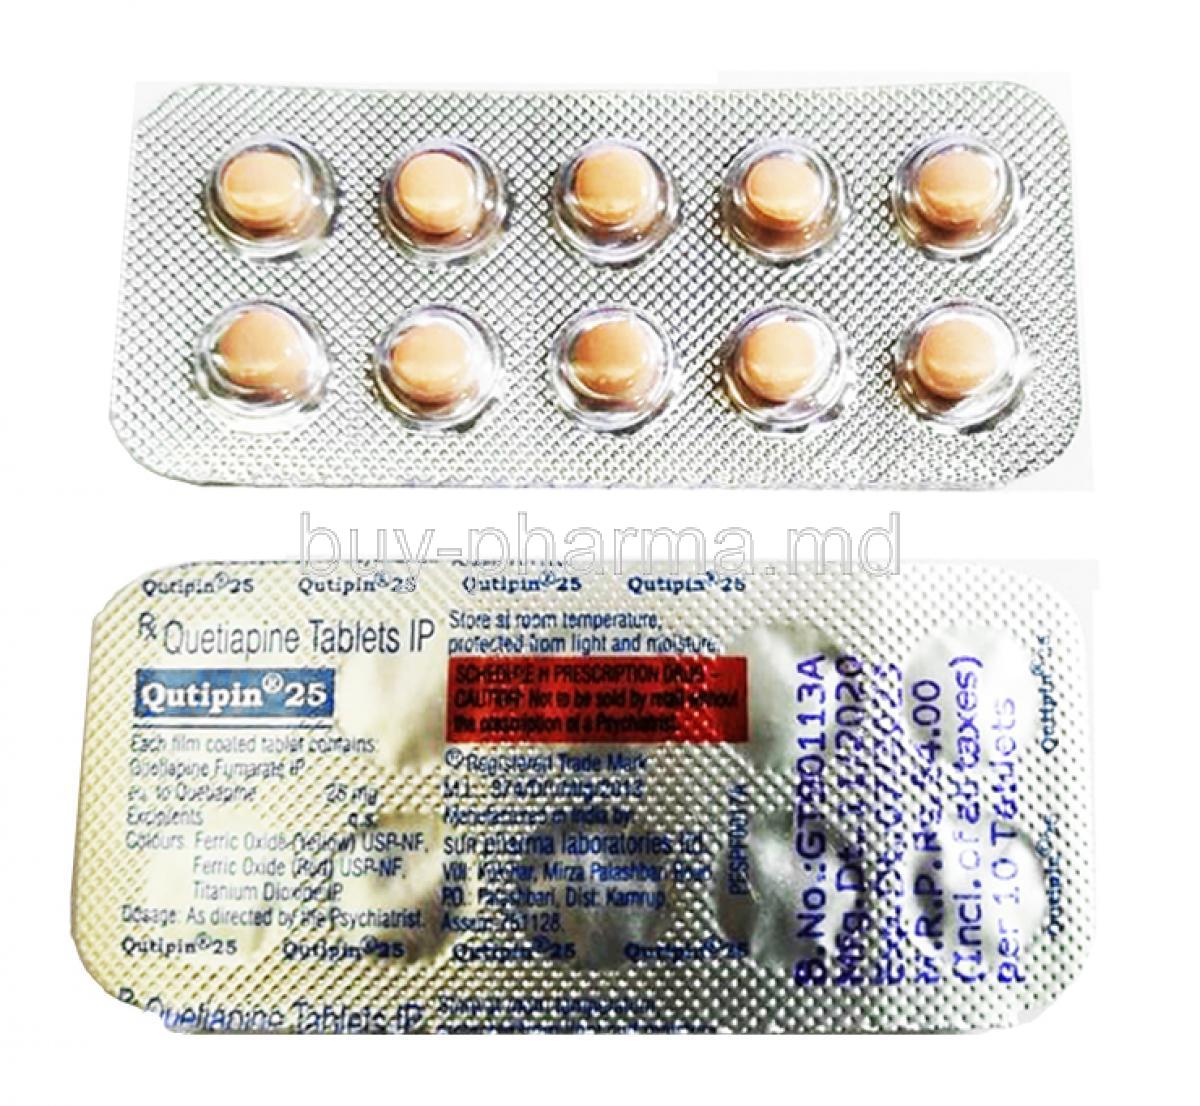 Qutipin, Quetiapine 25mg tablets, sheet front and back information